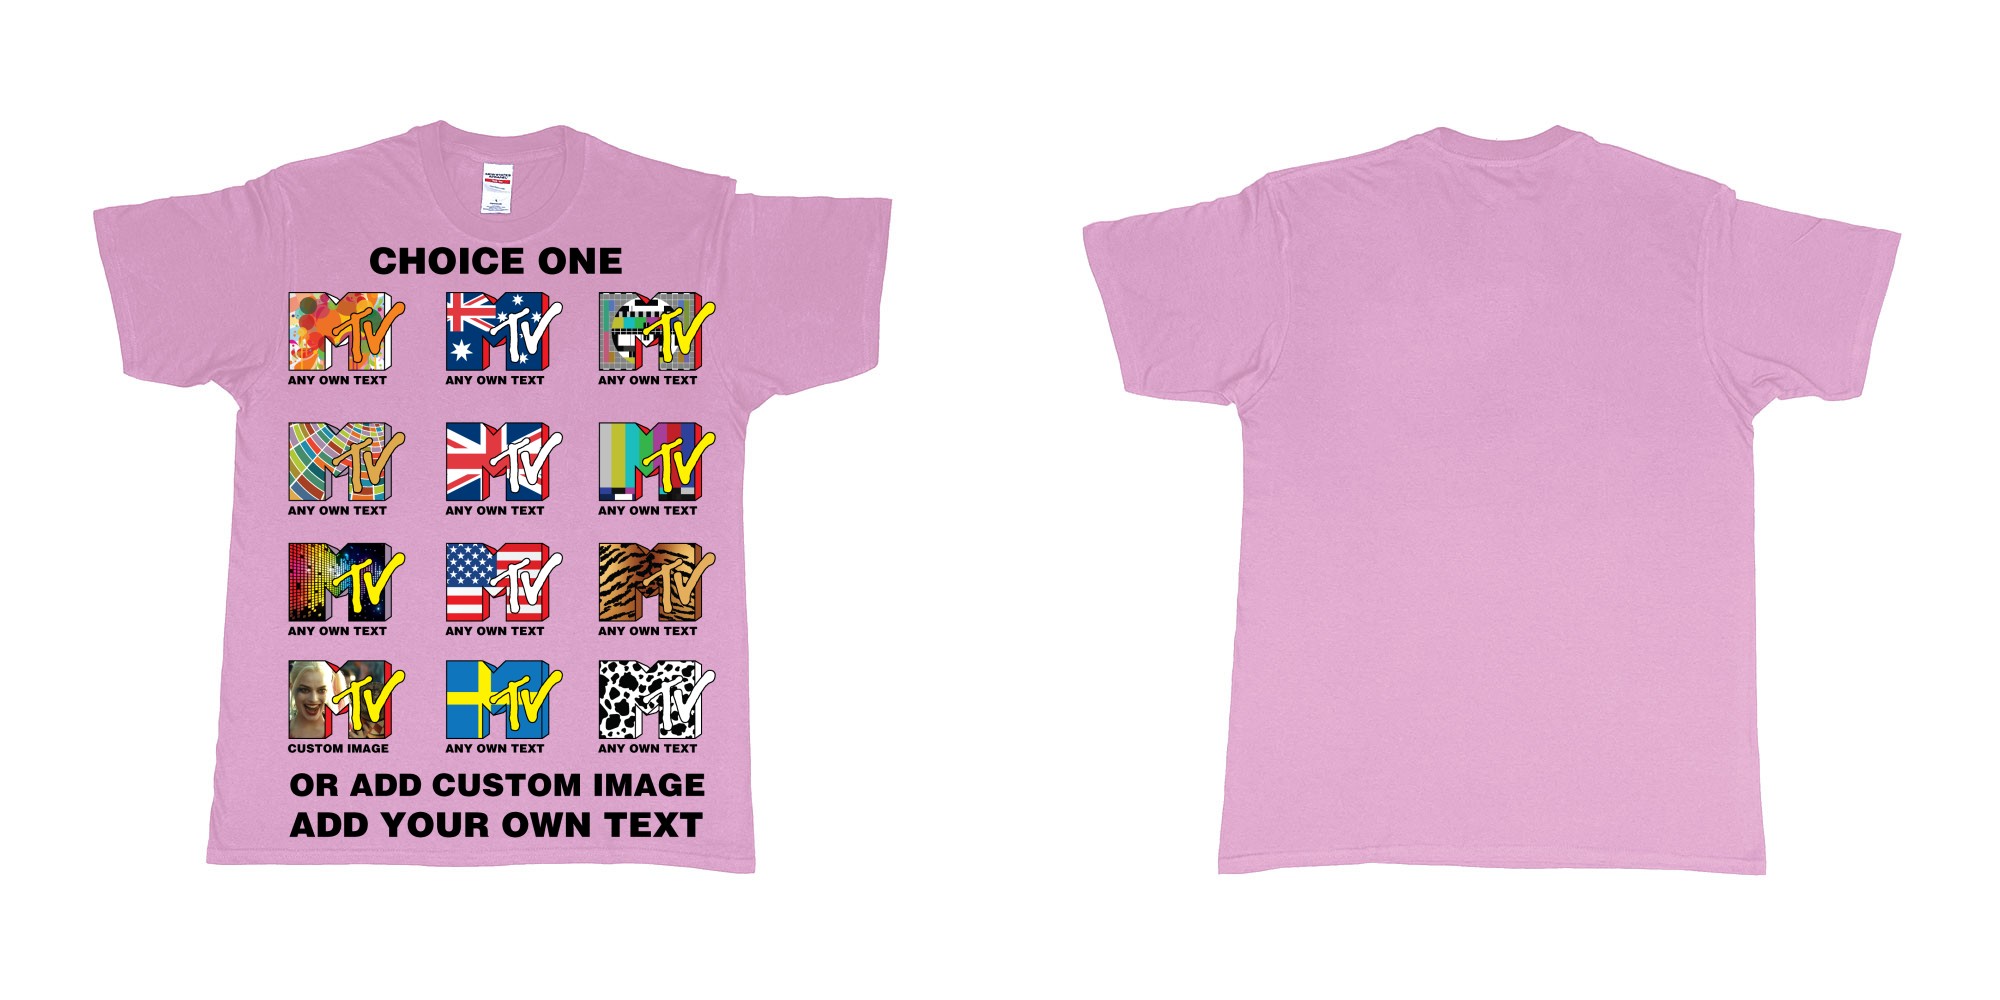 Custom tshirt design mtv logo choice any background text print in fabric color light-pink choice your own text made in Bali by The Pirate Way